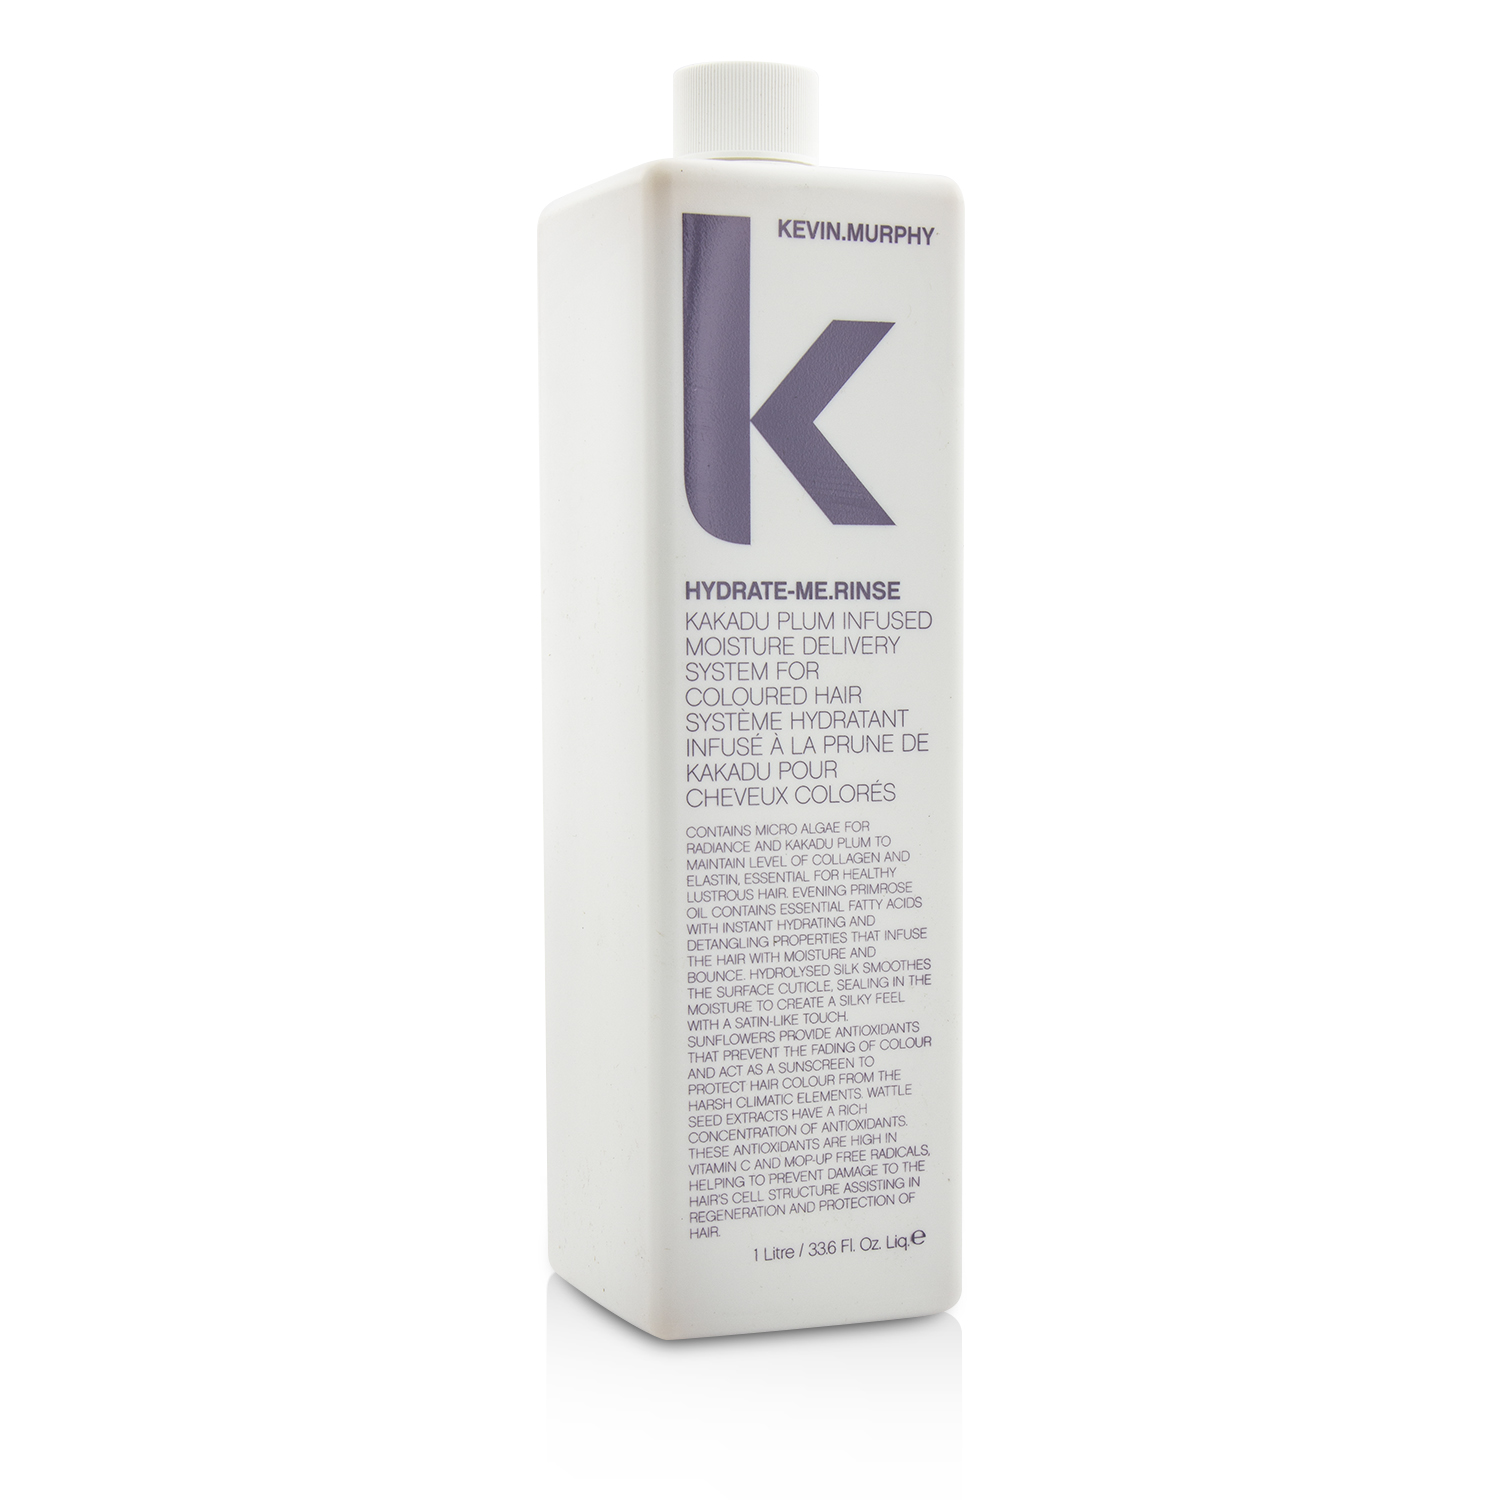 Hydrate-Me.Rinse (Kakadu Plum Infused Moisture Delivery System - For Coloured Hair) Kevin.Murphy Image